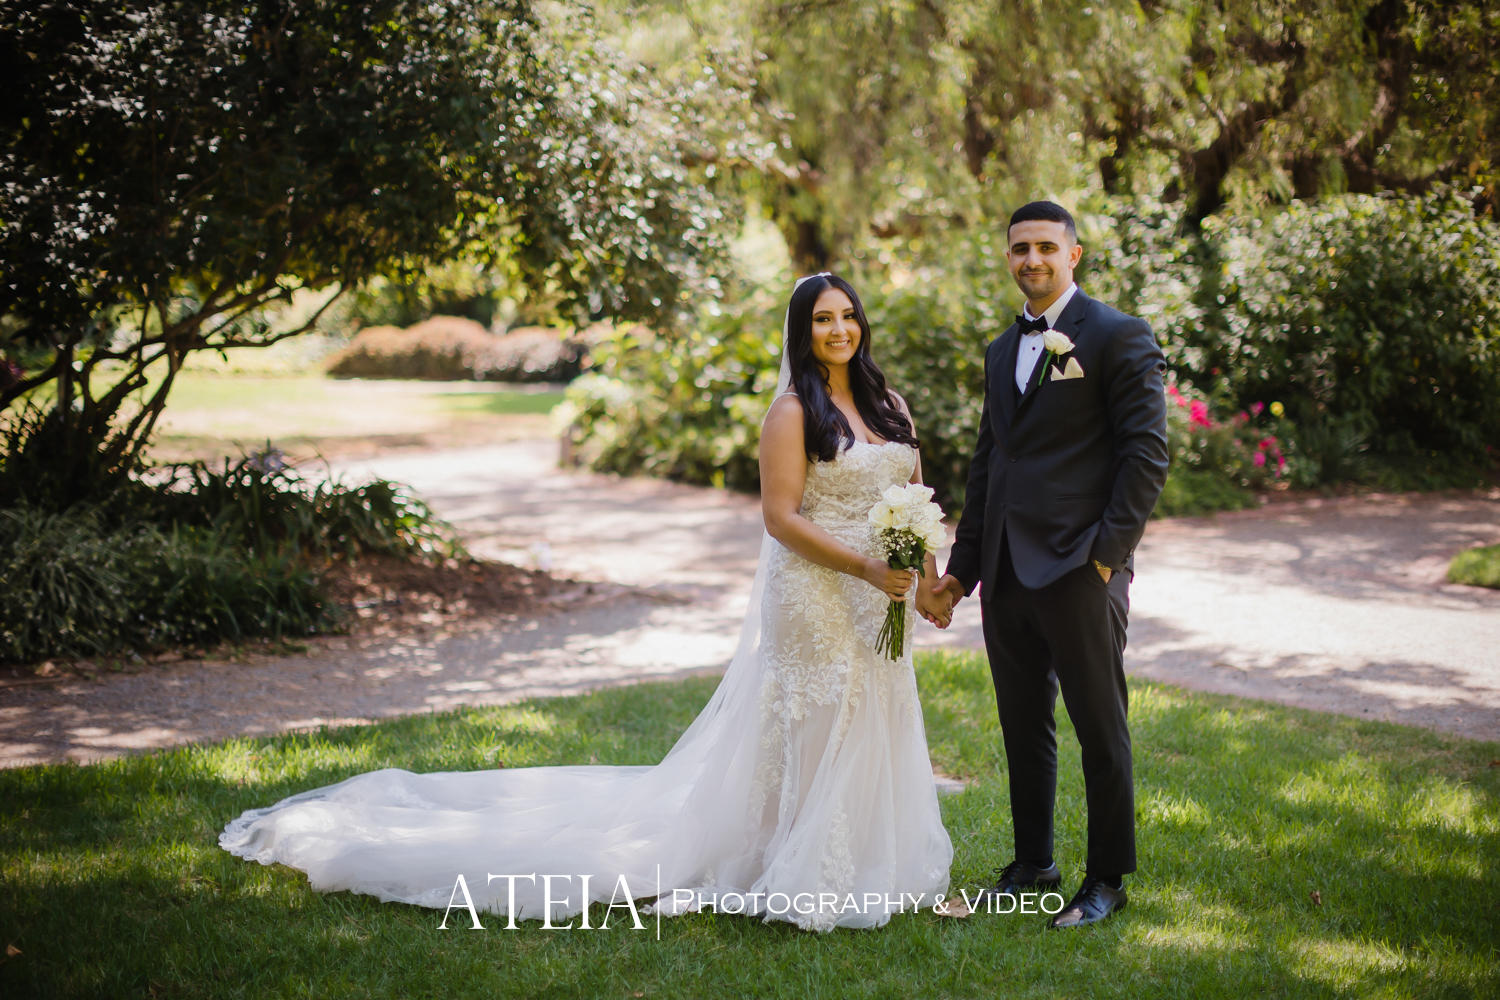 , Denise and Daniel’s wedding photography at Vogue Ballroom captured by ATEIA Photography &#038; Video